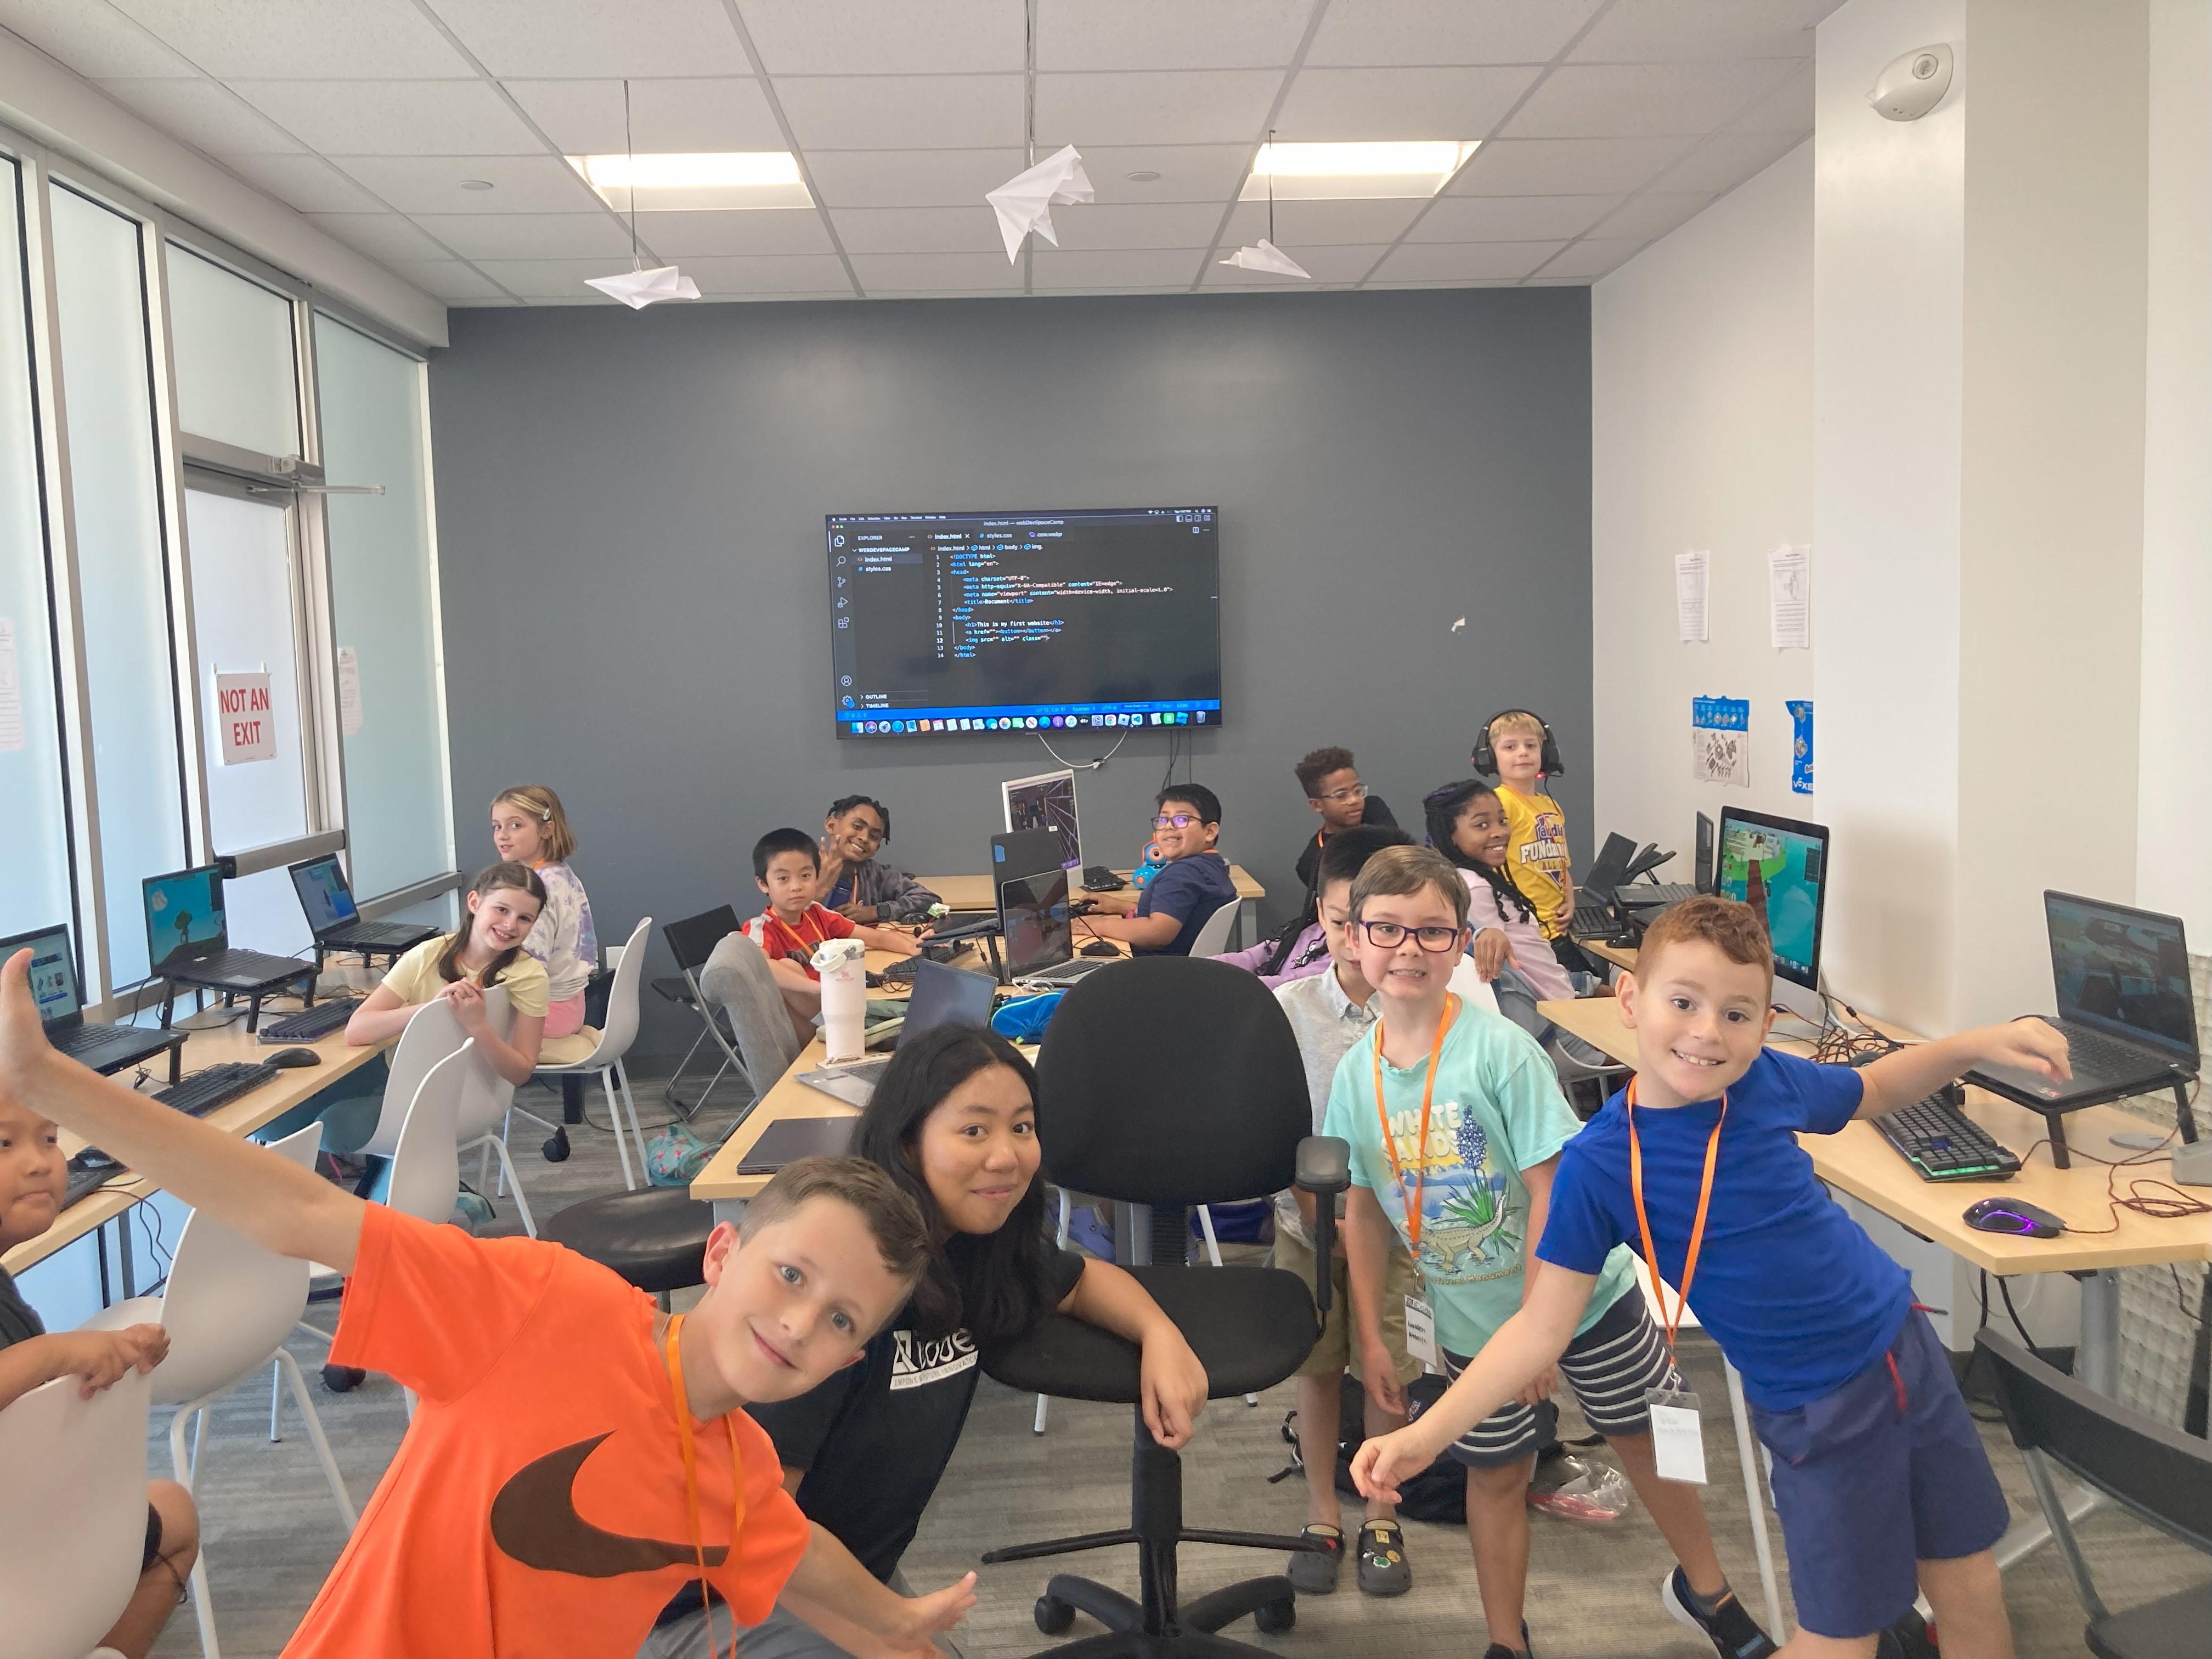 iCode offers fun and educational summer camp experiences for kids in Denver in coding and game design, from Scratch to Minecraft and Roblox.